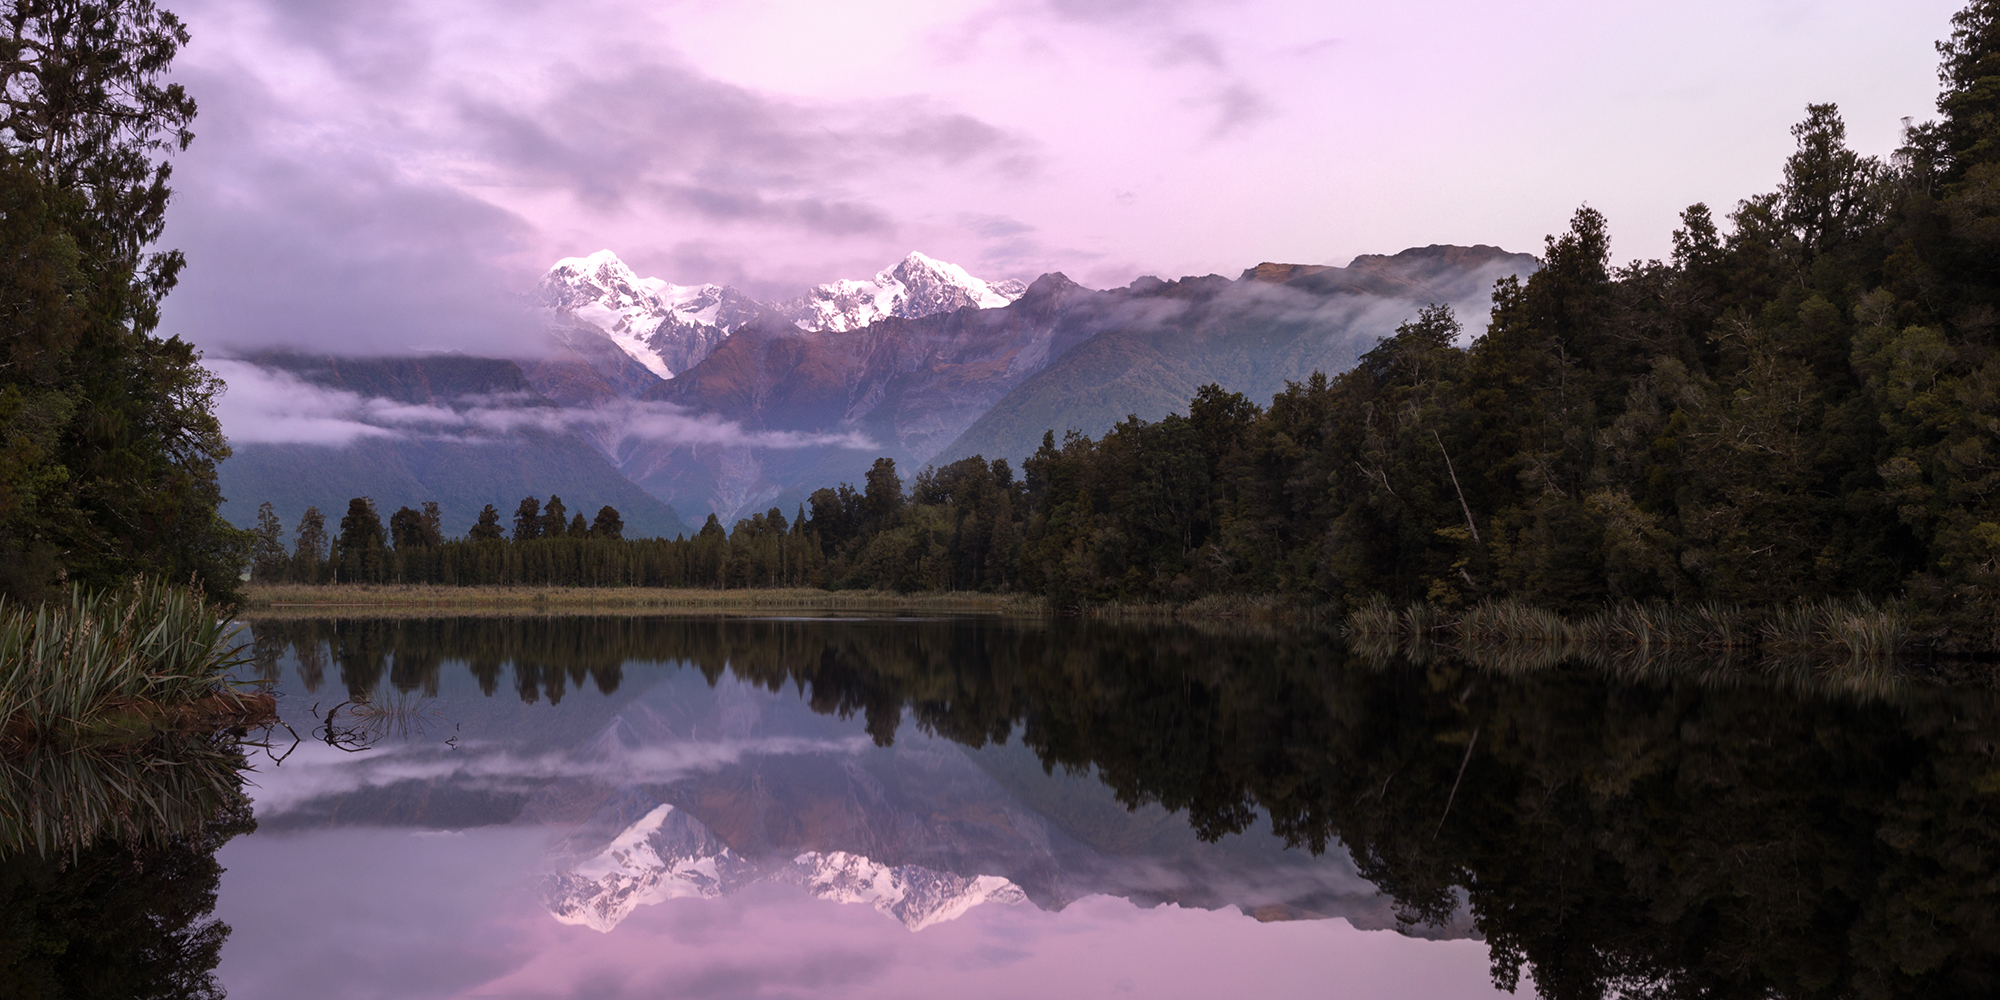 View of Southern Alps from Lake Matheson near Fox Glacier